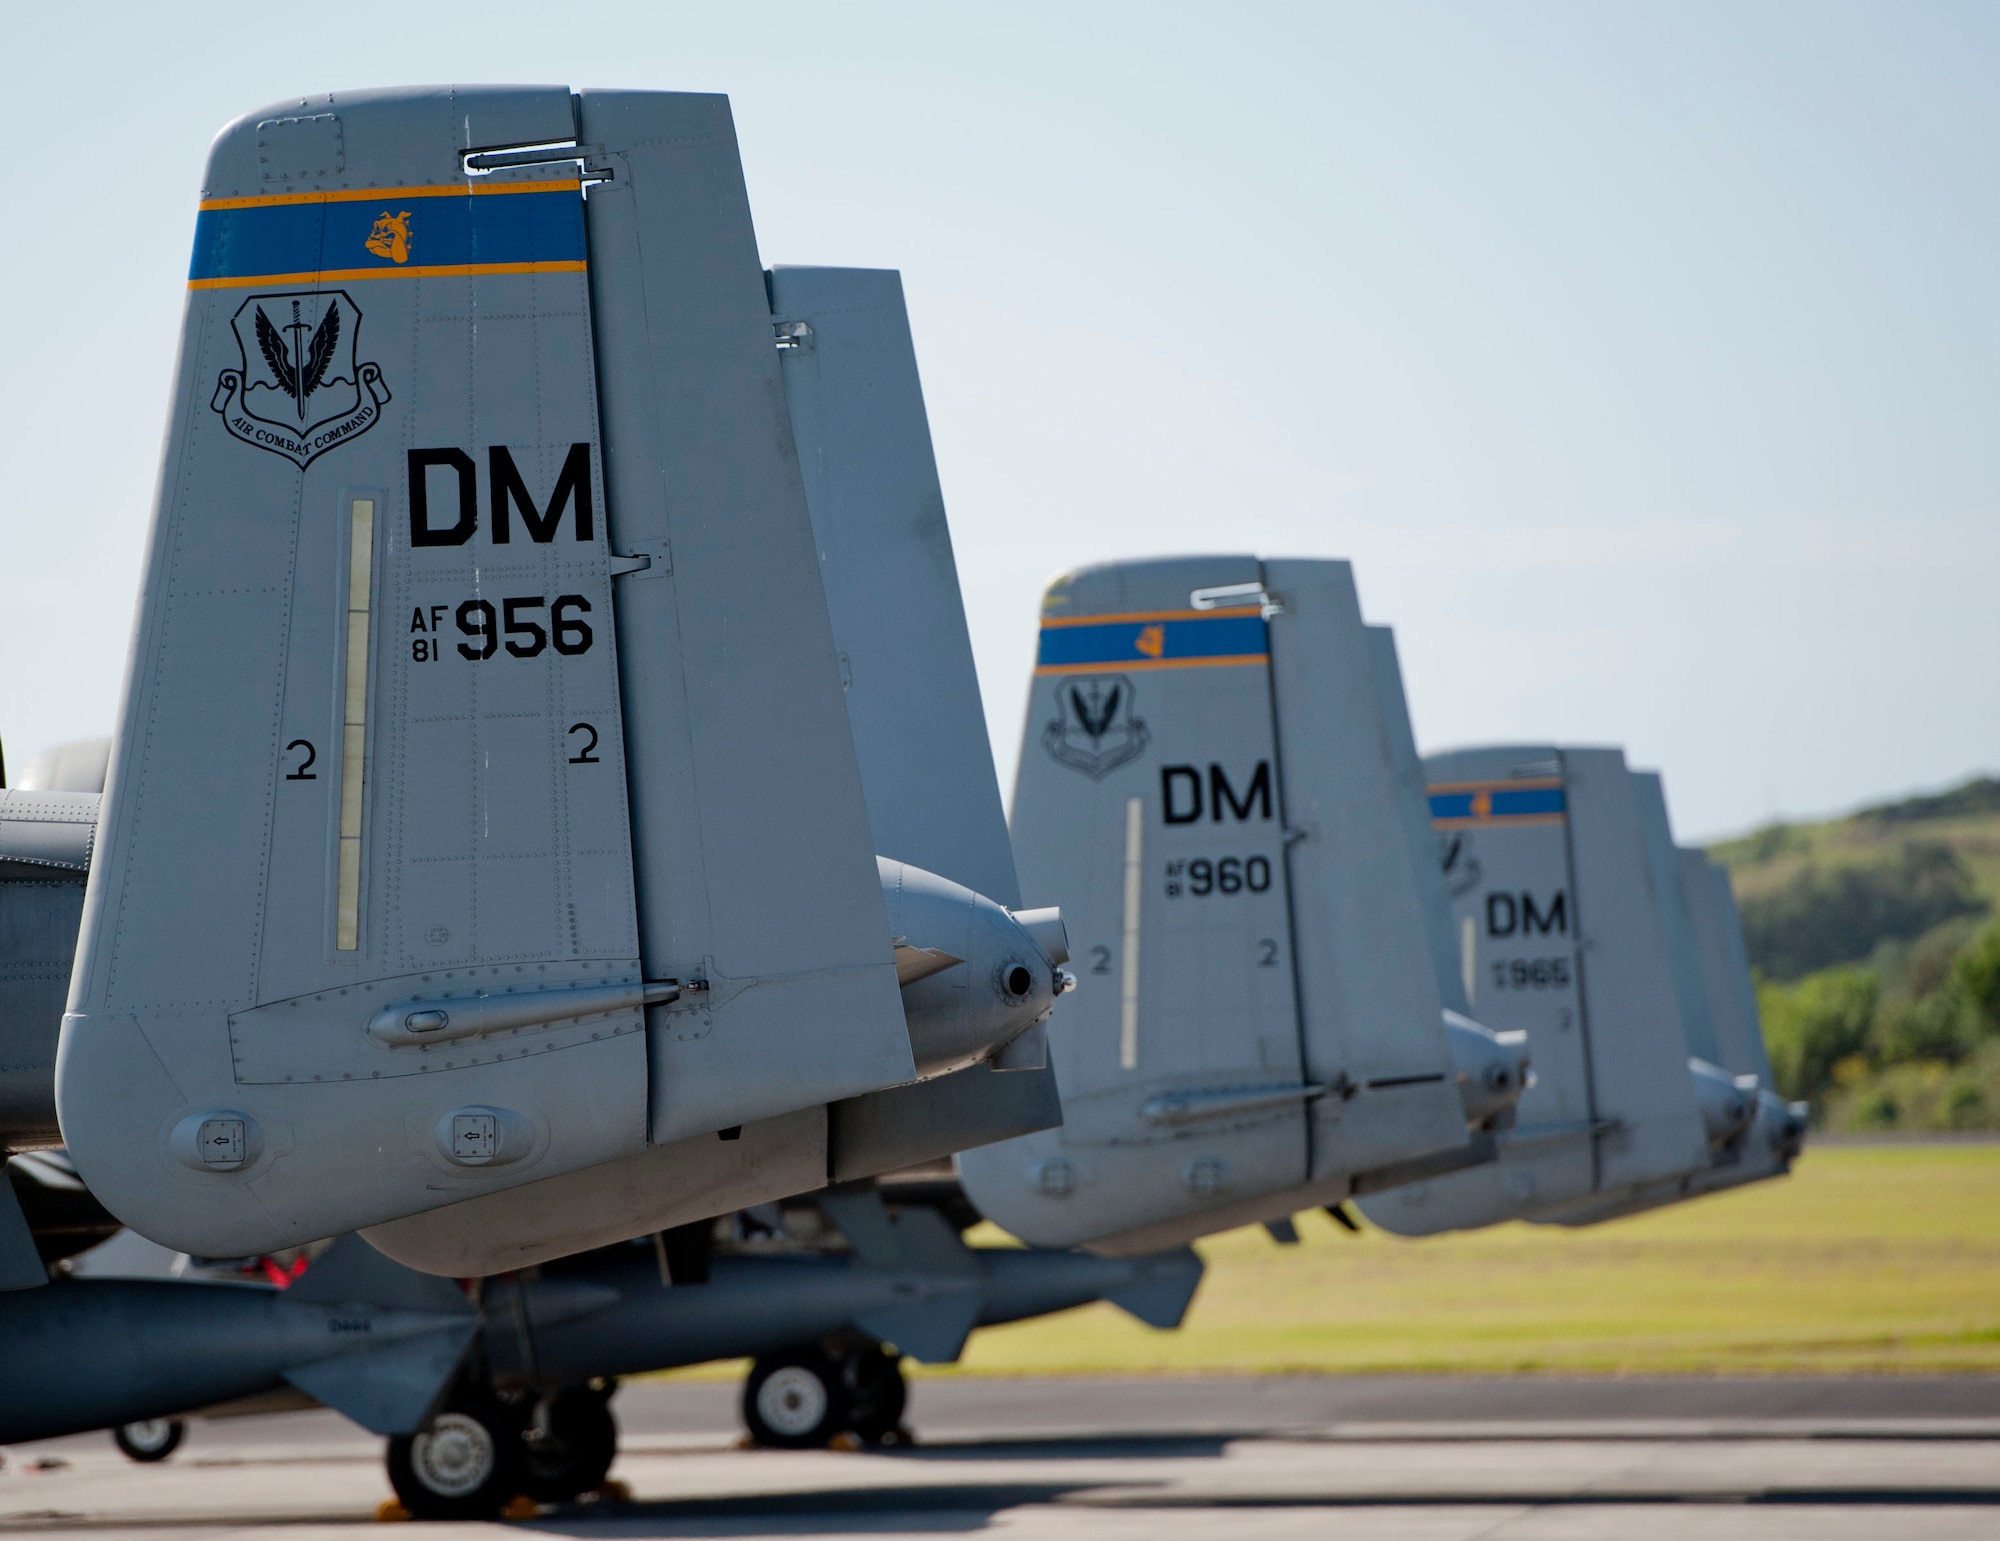 A group of U.S. Air Force A-10 Thunderbolt IIs with the 354th Expeditionary Fighter Squadron are parked on Lajes Field, Azores, Portugal, August 1, 2015. The 354th Expeditionary Fighter Squadron returns home after deploying 12 A-10s as part of a Theater Security Package in support of Operation Atlantic Resolve, to Spangdahlem AB, Germany where they conducted training alongside our NATO allies to strengthen interoperability and to demonstrate U.S. commitment to the security and stability of Europe. (U.S. Air Force photo by Master Sgt. Bradley C. Church).